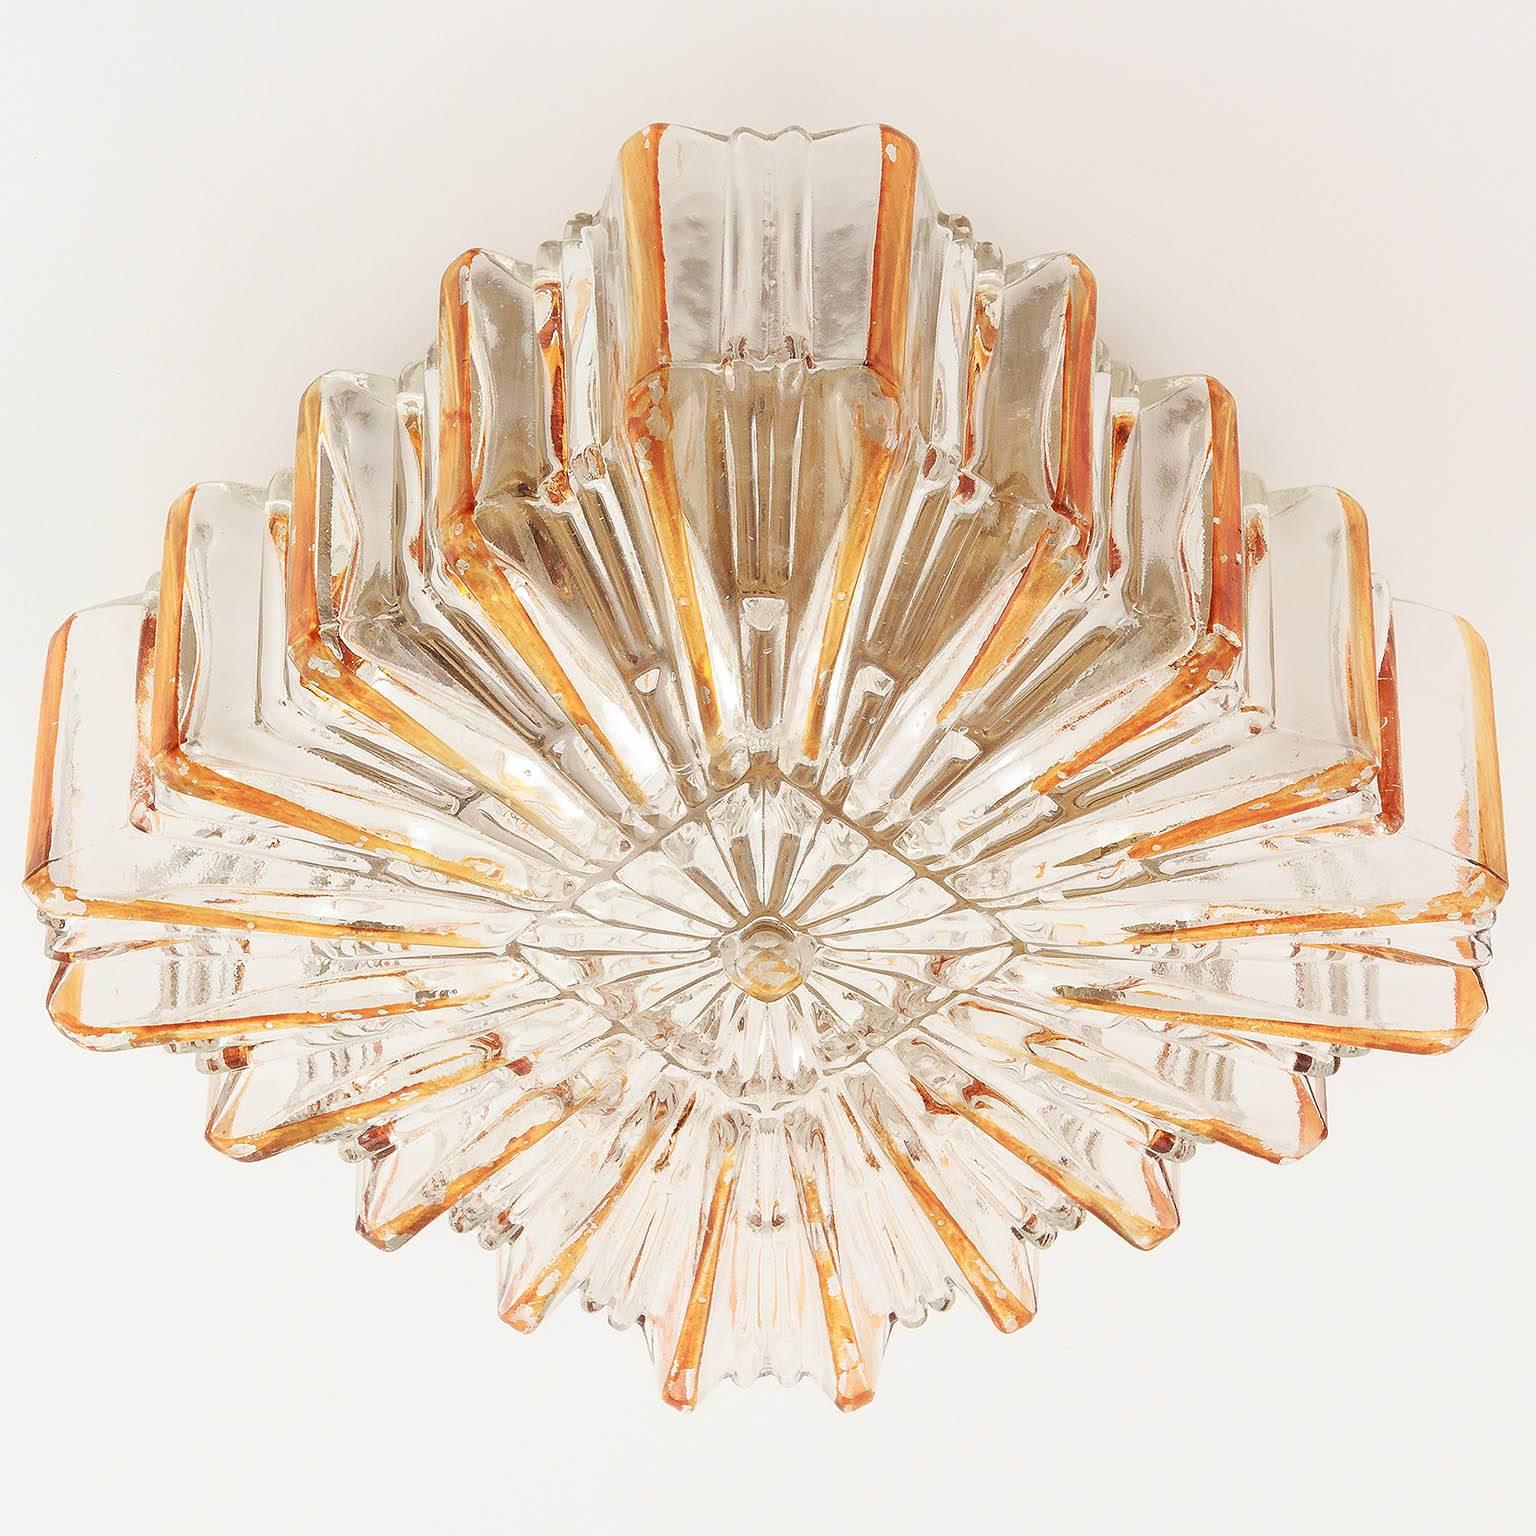 A vintage pair of glass flush mount sunburst sconces, manufactured Midcentury. Glass shades with amber tone rays and a gold toned circular backplate. Some wear, patina on backplate, can be repainted for free if required. Some flaking to the colored